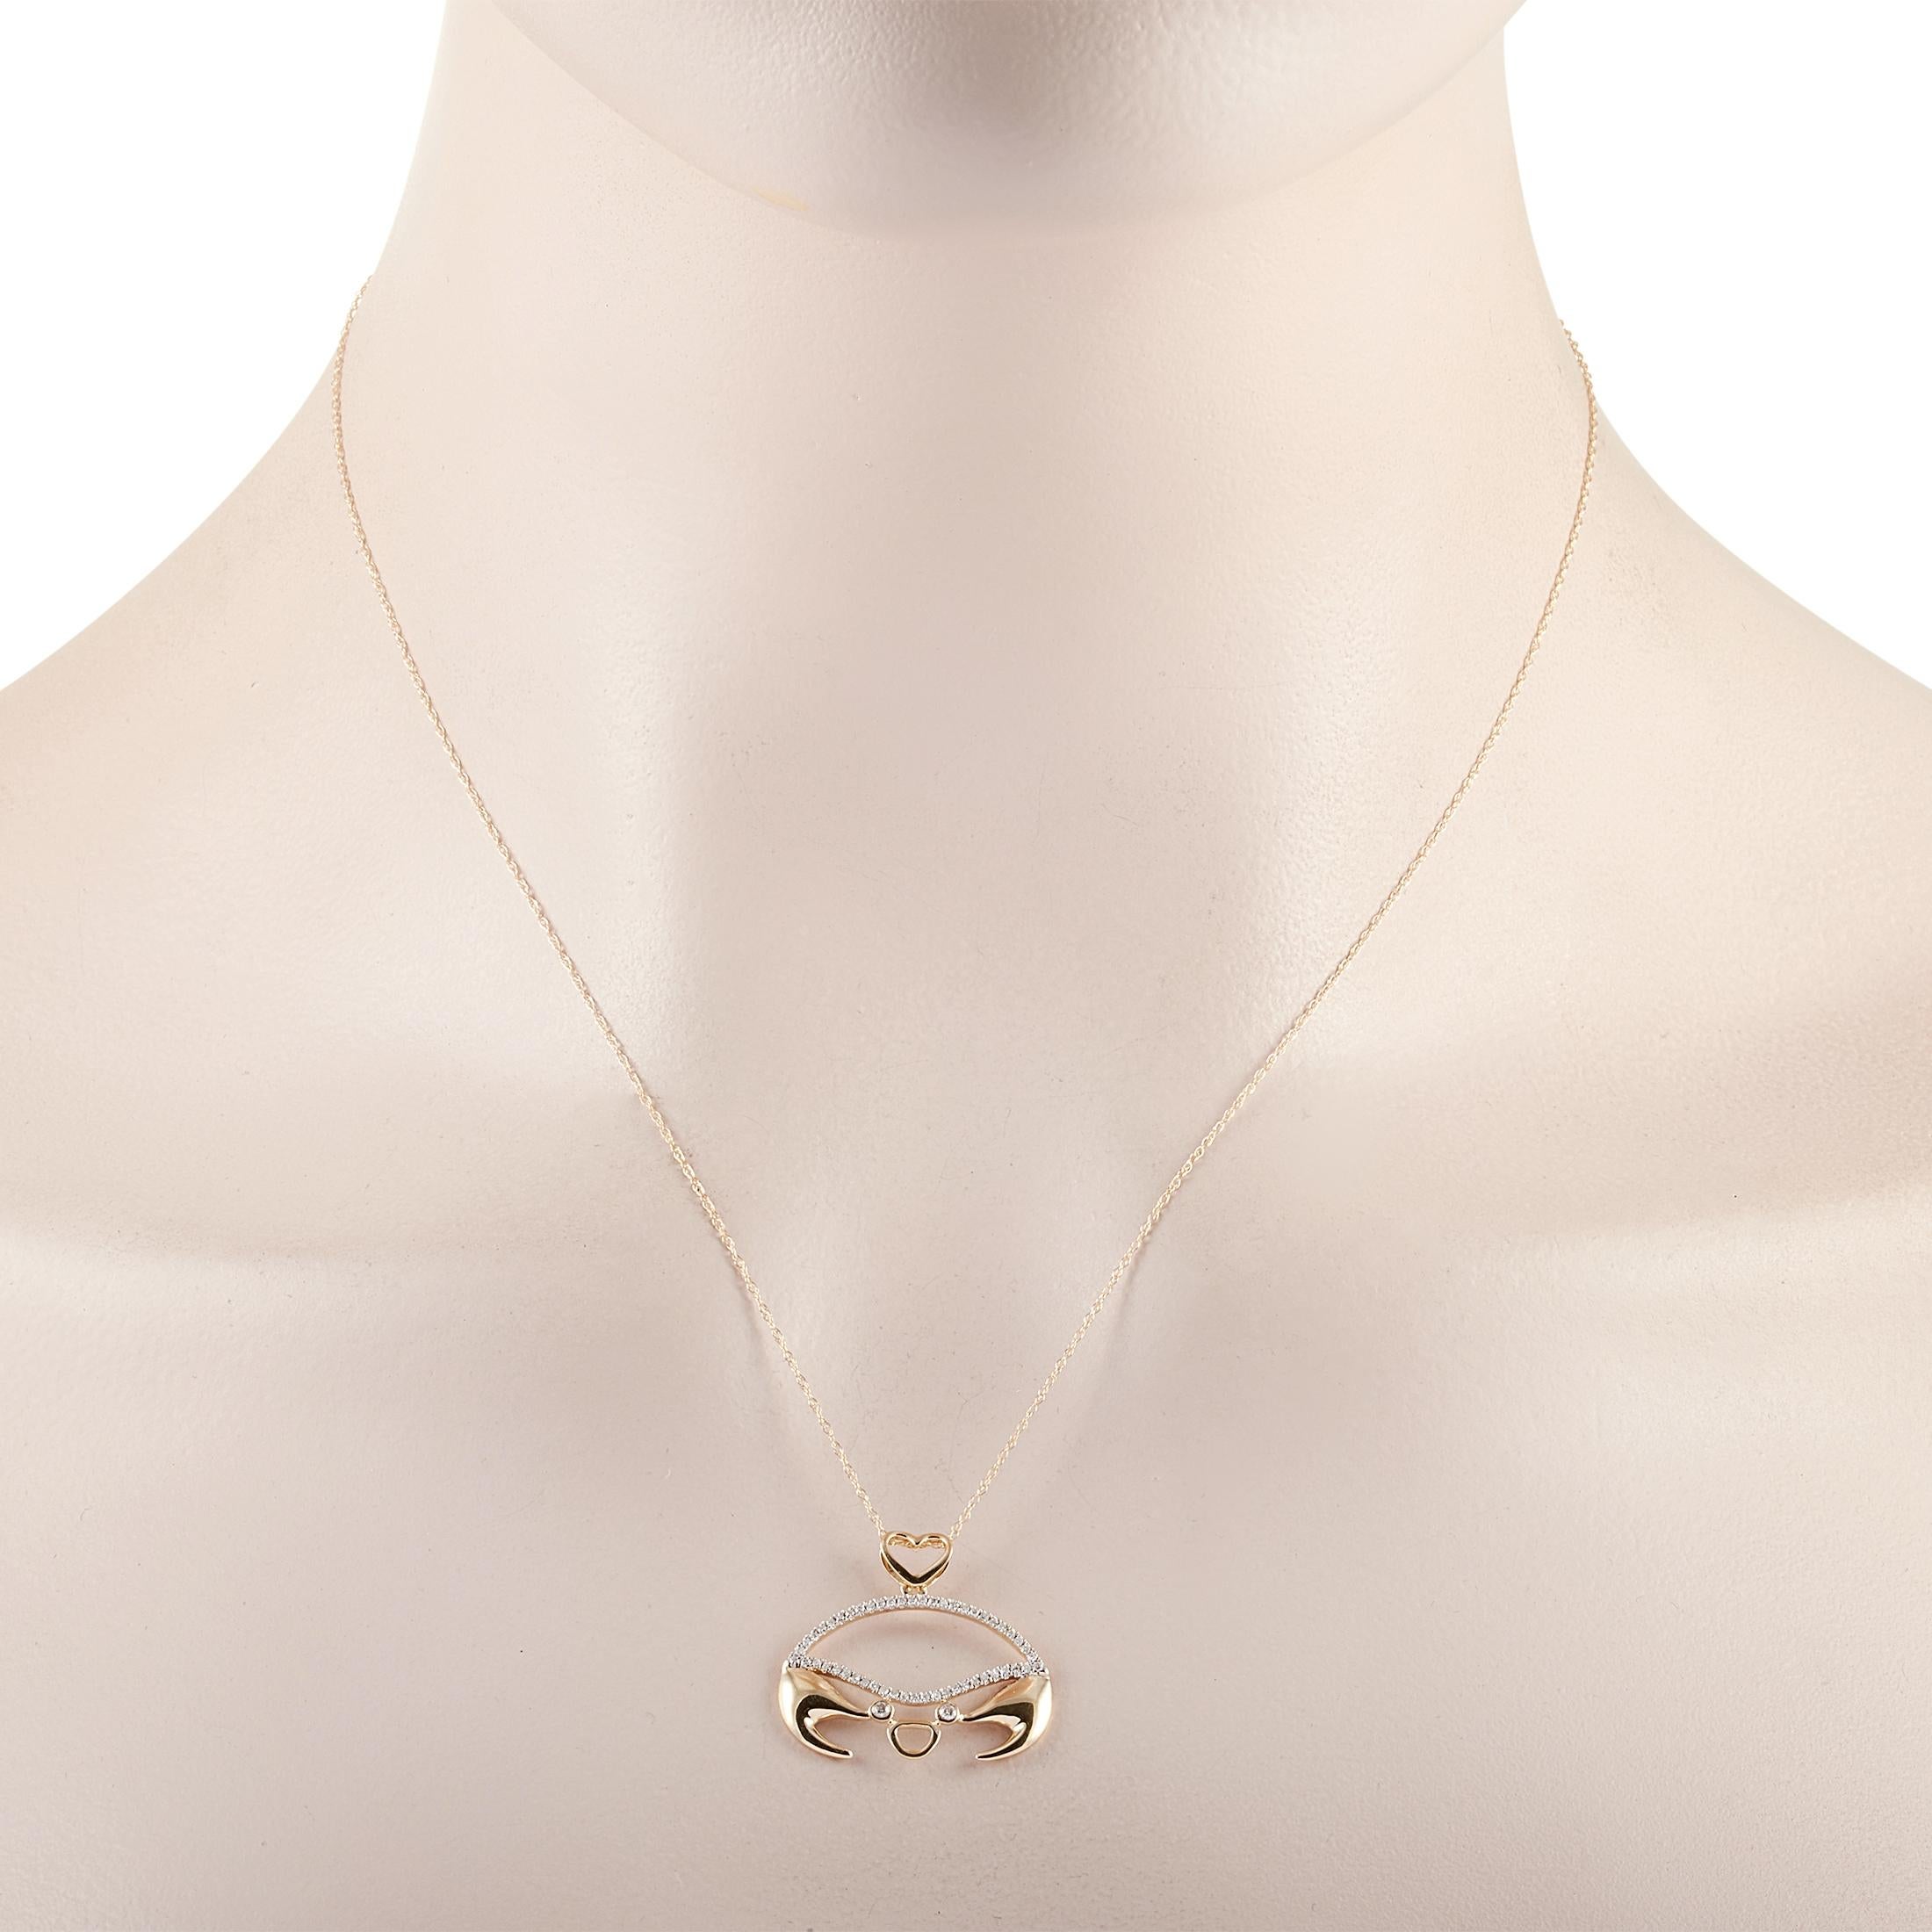 This LB Exclusive necklace is made of 14K yellow gold and embellished with diamonds that amount to 0.16 carats. The necklace weighs 2.3 grams and boasts a 17” chain and a crab pendant that measures 0.88” in length and 1” in width.
 
 Offered in